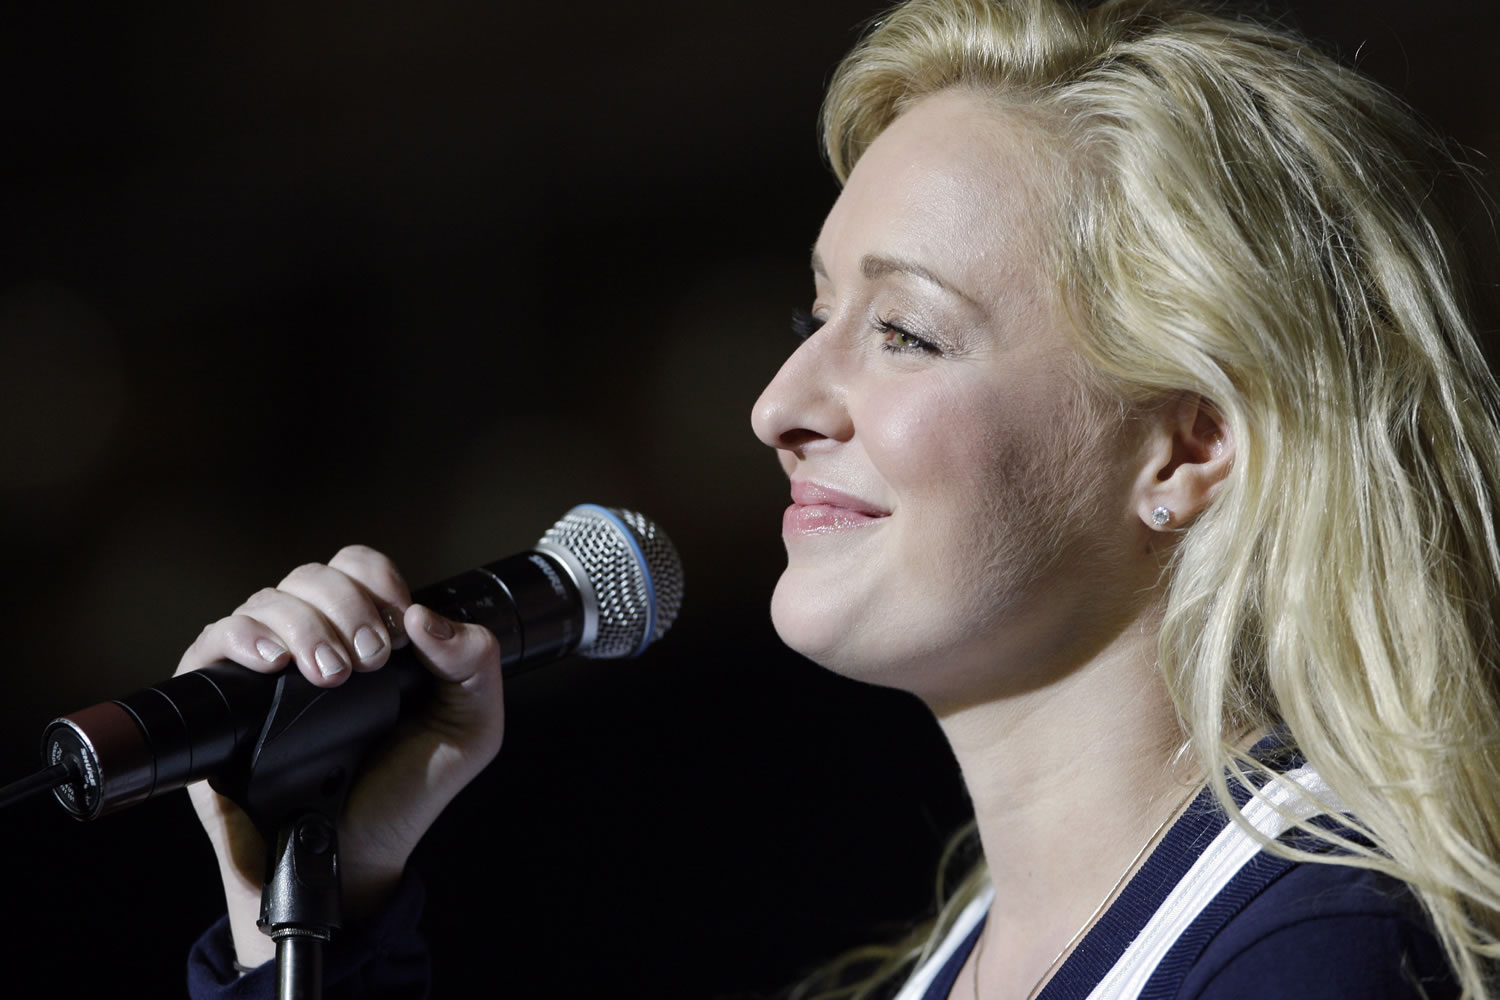 In this undated file photo, country singer Mindy McCready performs in Nashville, Tenn. McCready, who hit the top of the country charts before personal problems sidetracked her career, died Sunday in an apparent siucide.